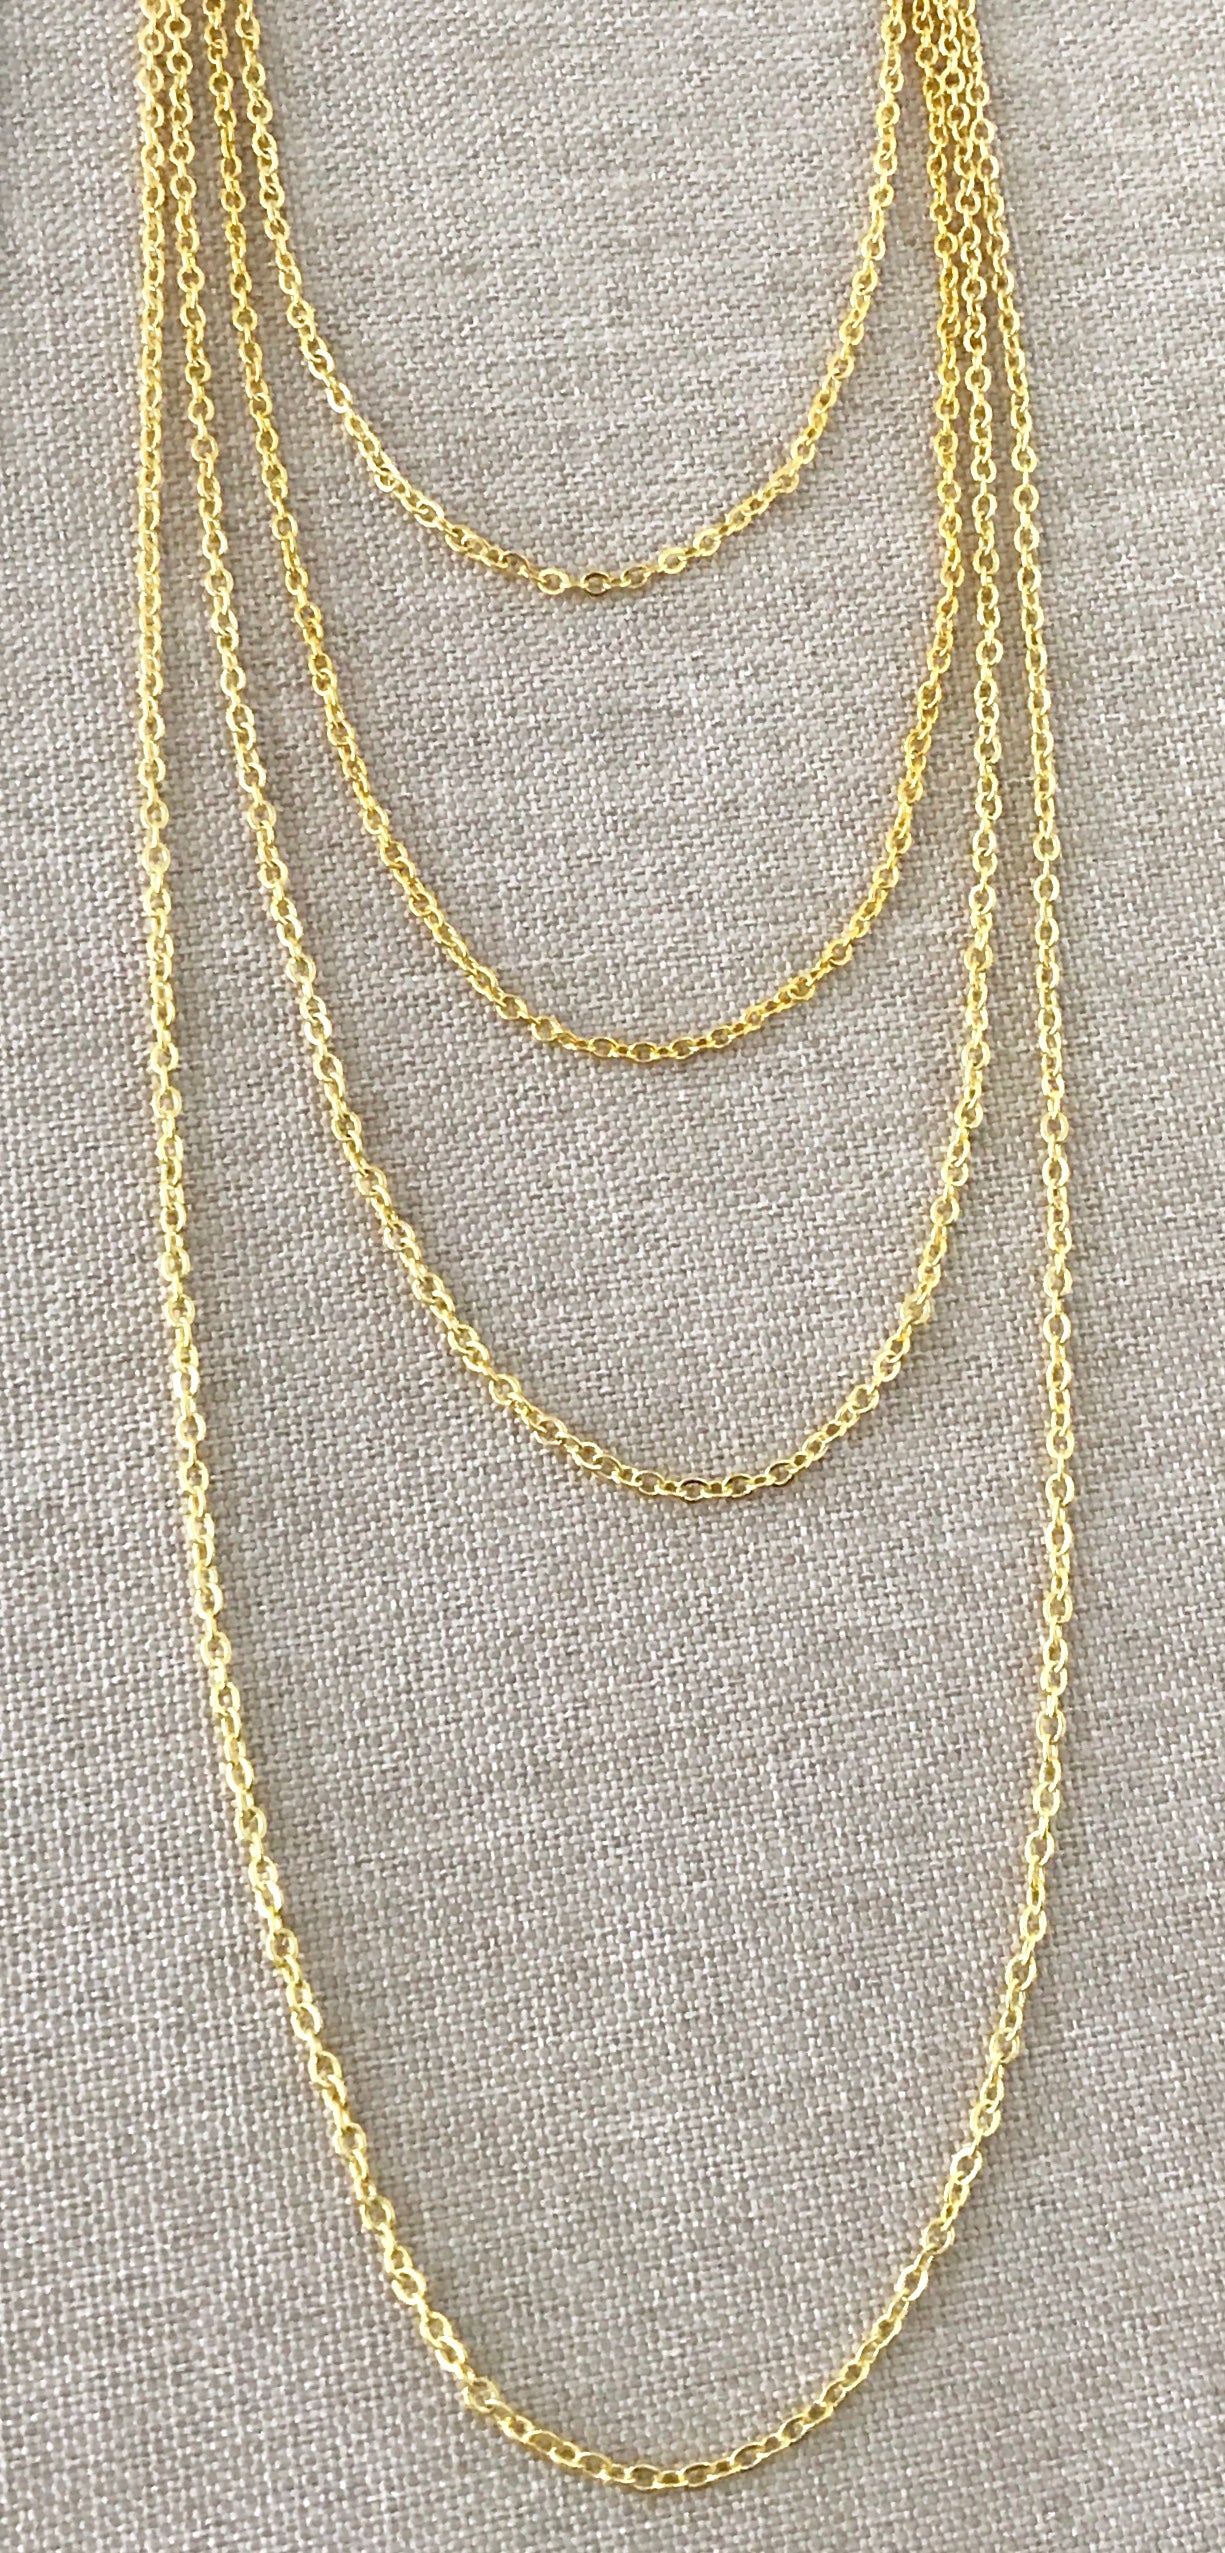 Gold Filled Chain - 24 inch 14/20 GF Necklace - 1.3 mm Dainty Cable Neck Chain with Spring Ring - Bright Finish Wholesale New Jewelry Supply